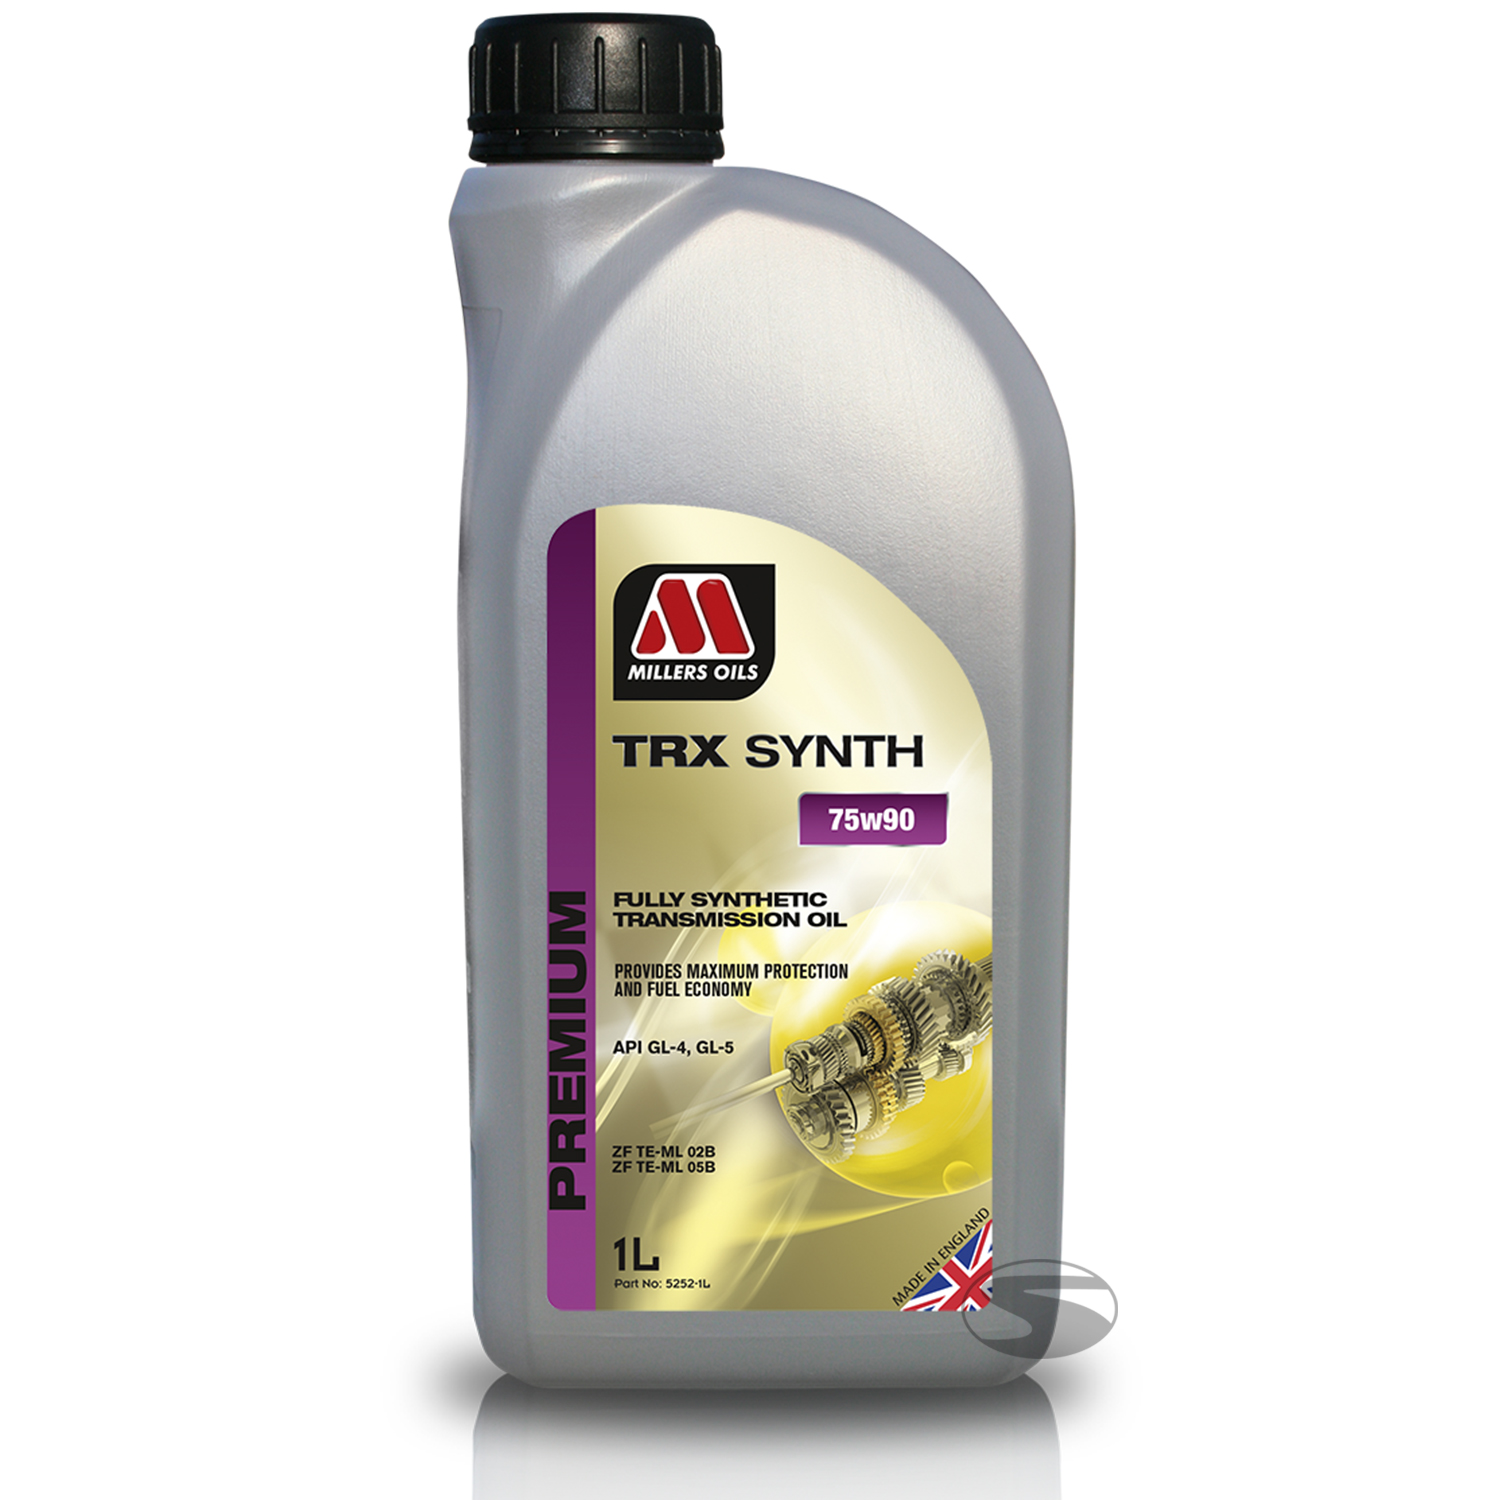 Millers Oils TRX Synth 75W-90, 1 Liter